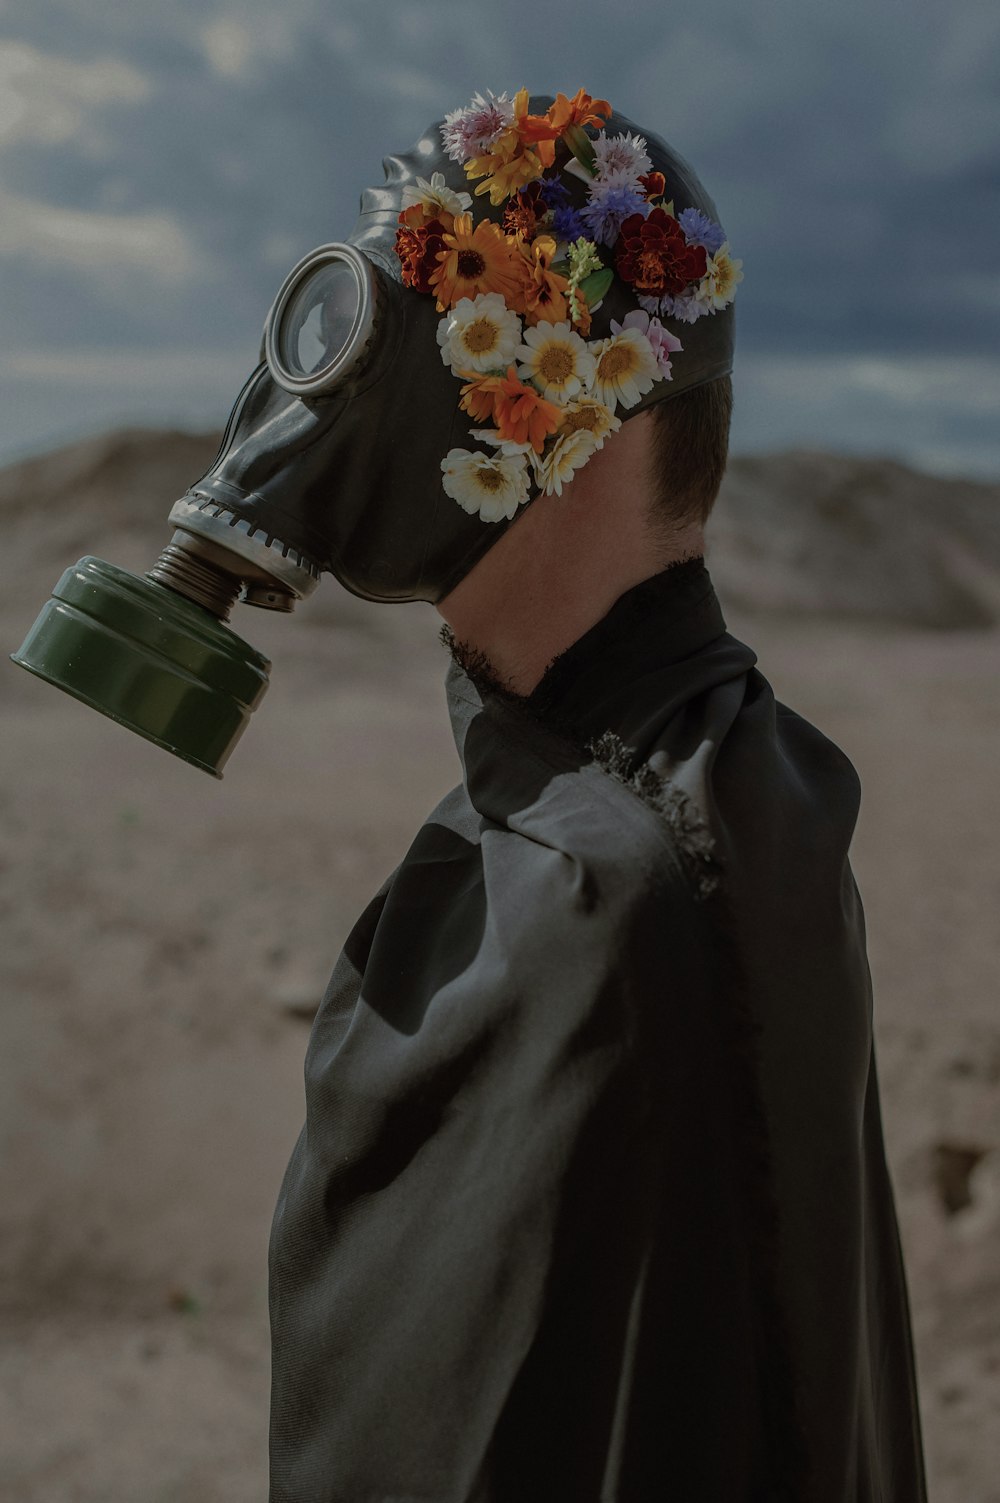 a man wearing a gas mask with flowers on his head